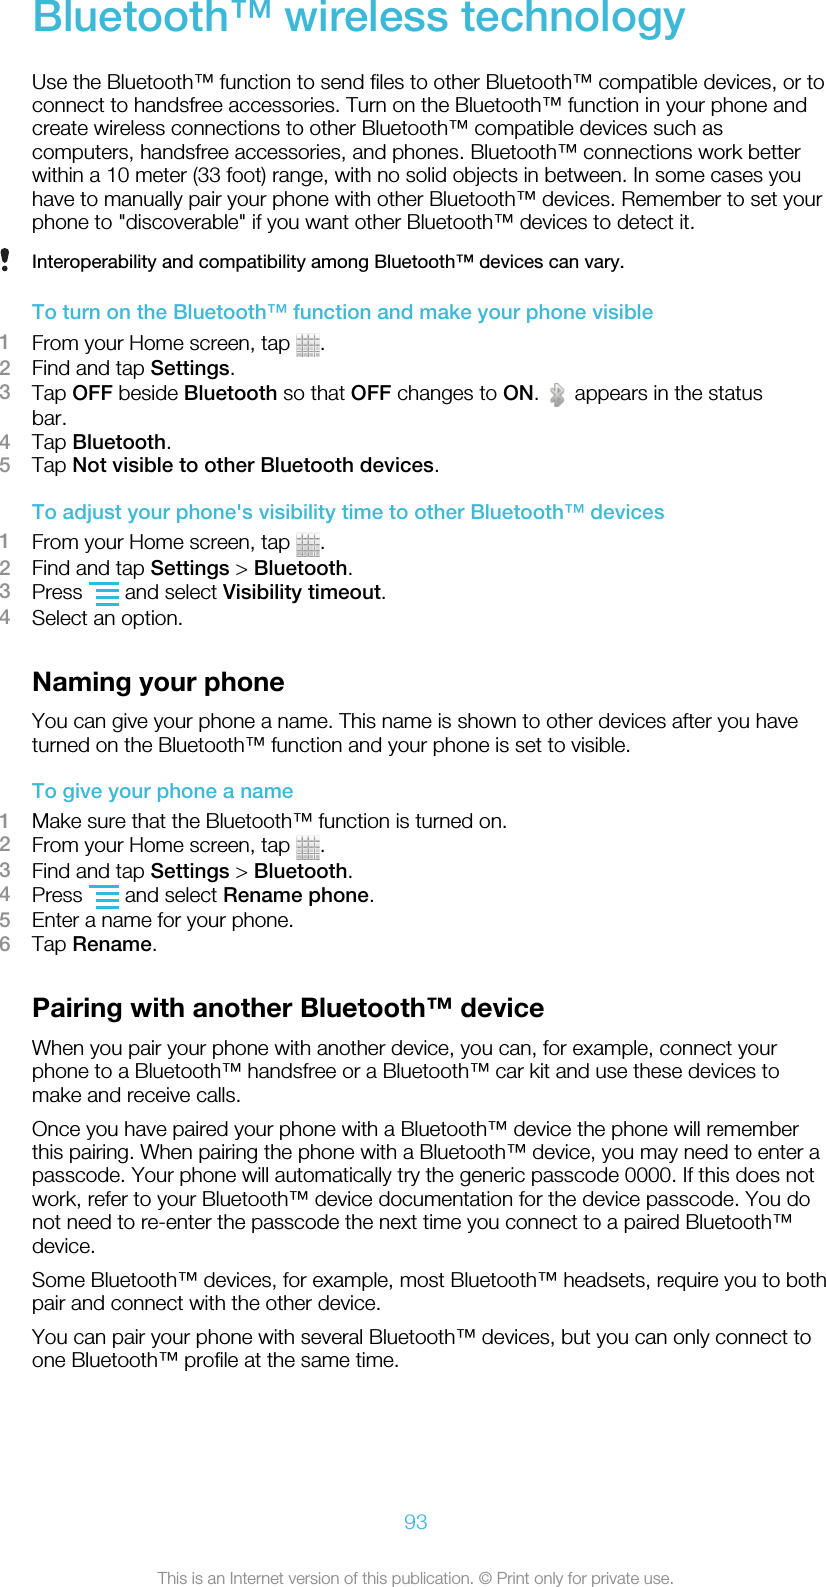 Bluetooth™ wireless technologyUse the Bluetooth™ function to send files to other Bluetooth™ compatible devices, or toconnect to handsfree accessories. Turn on the Bluetooth™ function in your phone andcreate wireless connections to other Bluetooth™ compatible devices such ascomputers, handsfree accessories, and phones. Bluetooth™ connections work betterwithin a 10 meter (33 foot) range, with no solid objects in between. In some cases youhave to manually pair your phone with other Bluetooth™ devices. Remember to set yourphone to &quot;discoverable&quot; if you want other Bluetooth™ devices to detect it.Interoperability and compatibility among Bluetooth™ devices can vary.To turn on the Bluetooth™ function and make your phone visible1From your Home screen, tap  .2Find and tap Settings.3Tap OFF beside Bluetooth so that OFF changes to ON.   appears in the statusbar.4Tap Bluetooth.5Tap Not visible to other Bluetooth devices.To adjust your phone&apos;s visibility time to other Bluetooth™ devices1From your Home screen, tap  .2Find and tap Settings &gt; Bluetooth.3Press   and select Visibility timeout.4Select an option.Naming your phoneYou can give your phone a name. This name is shown to other devices after you haveturned on the Bluetooth™ function and your phone is set to visible.To give your phone a name1Make sure that the Bluetooth™ function is turned on.2From your Home screen, tap  .3Find and tap Settings &gt; Bluetooth.4Press   and select Rename phone.5Enter a name for your phone.6Tap Rename.Pairing with another Bluetooth™ deviceWhen you pair your phone with another device, you can, for example, connect yourphone to a Bluetooth™ handsfree or a Bluetooth™ car kit and use these devices tomake and receive calls.Once you have paired your phone with a Bluetooth™ device the phone will rememberthis pairing. When pairing the phone with a Bluetooth™ device, you may need to enter apasscode. Your phone will automatically try the generic passcode 0000. If this does notwork, refer to your Bluetooth™ device documentation for the device passcode. You donot need to re-enter the passcode the next time you connect to a paired Bluetooth™device.Some Bluetooth™ devices, for example, most Bluetooth™ headsets, require you to bothpair and connect with the other device.You can pair your phone with several Bluetooth™ devices, but you can only connect toone Bluetooth™ profile at the same time.93This is an Internet version of this publication. © Print only for private use.